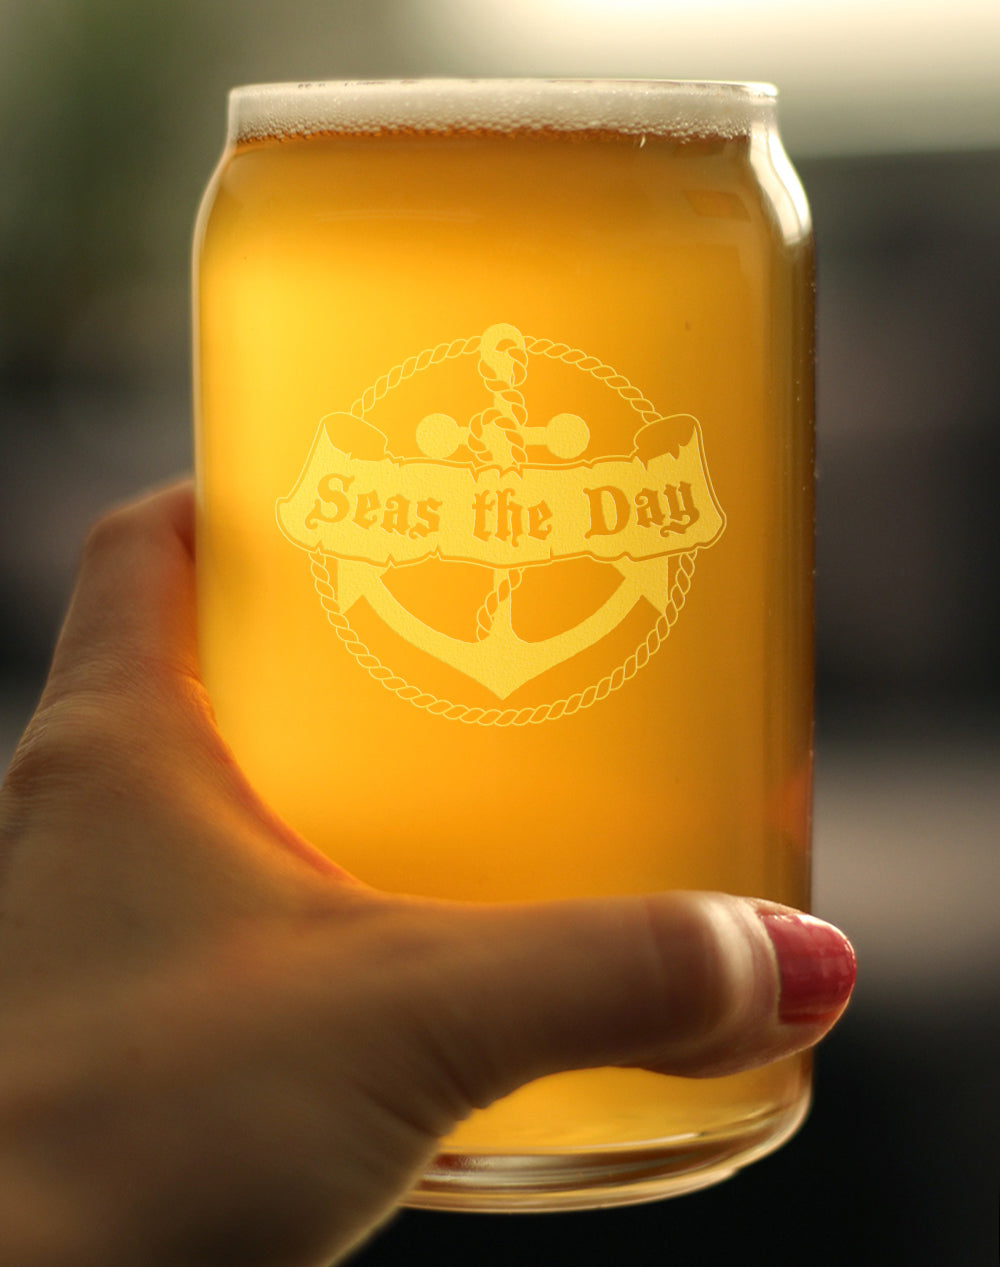 Seas the Day - 16 Ounce Beer Can Pint Glass